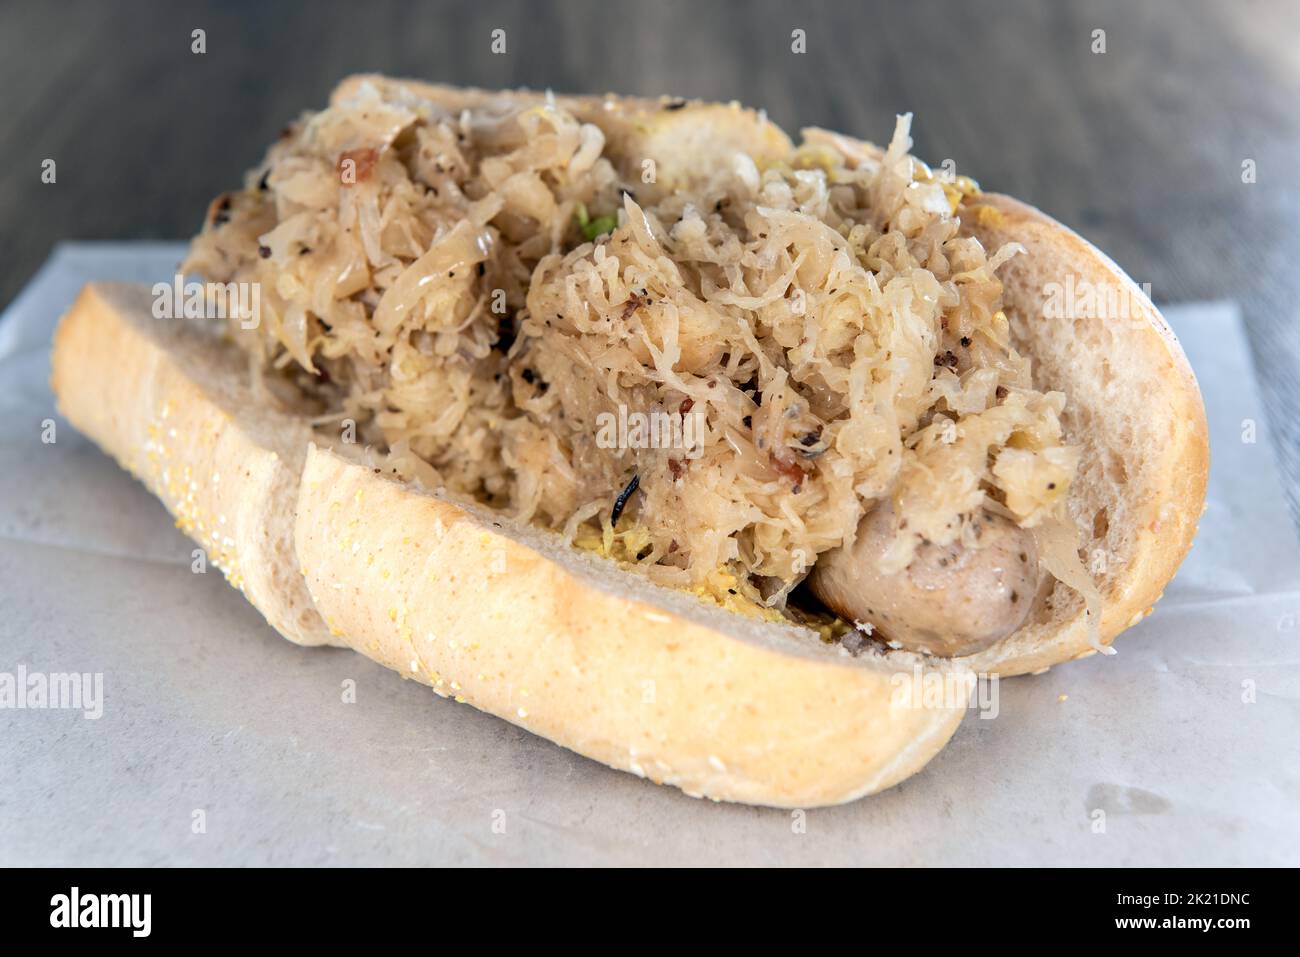 Lunch is served with a loaded bratwurst and sauerkraut sandwich overflowing with ingredients. Stock Photo